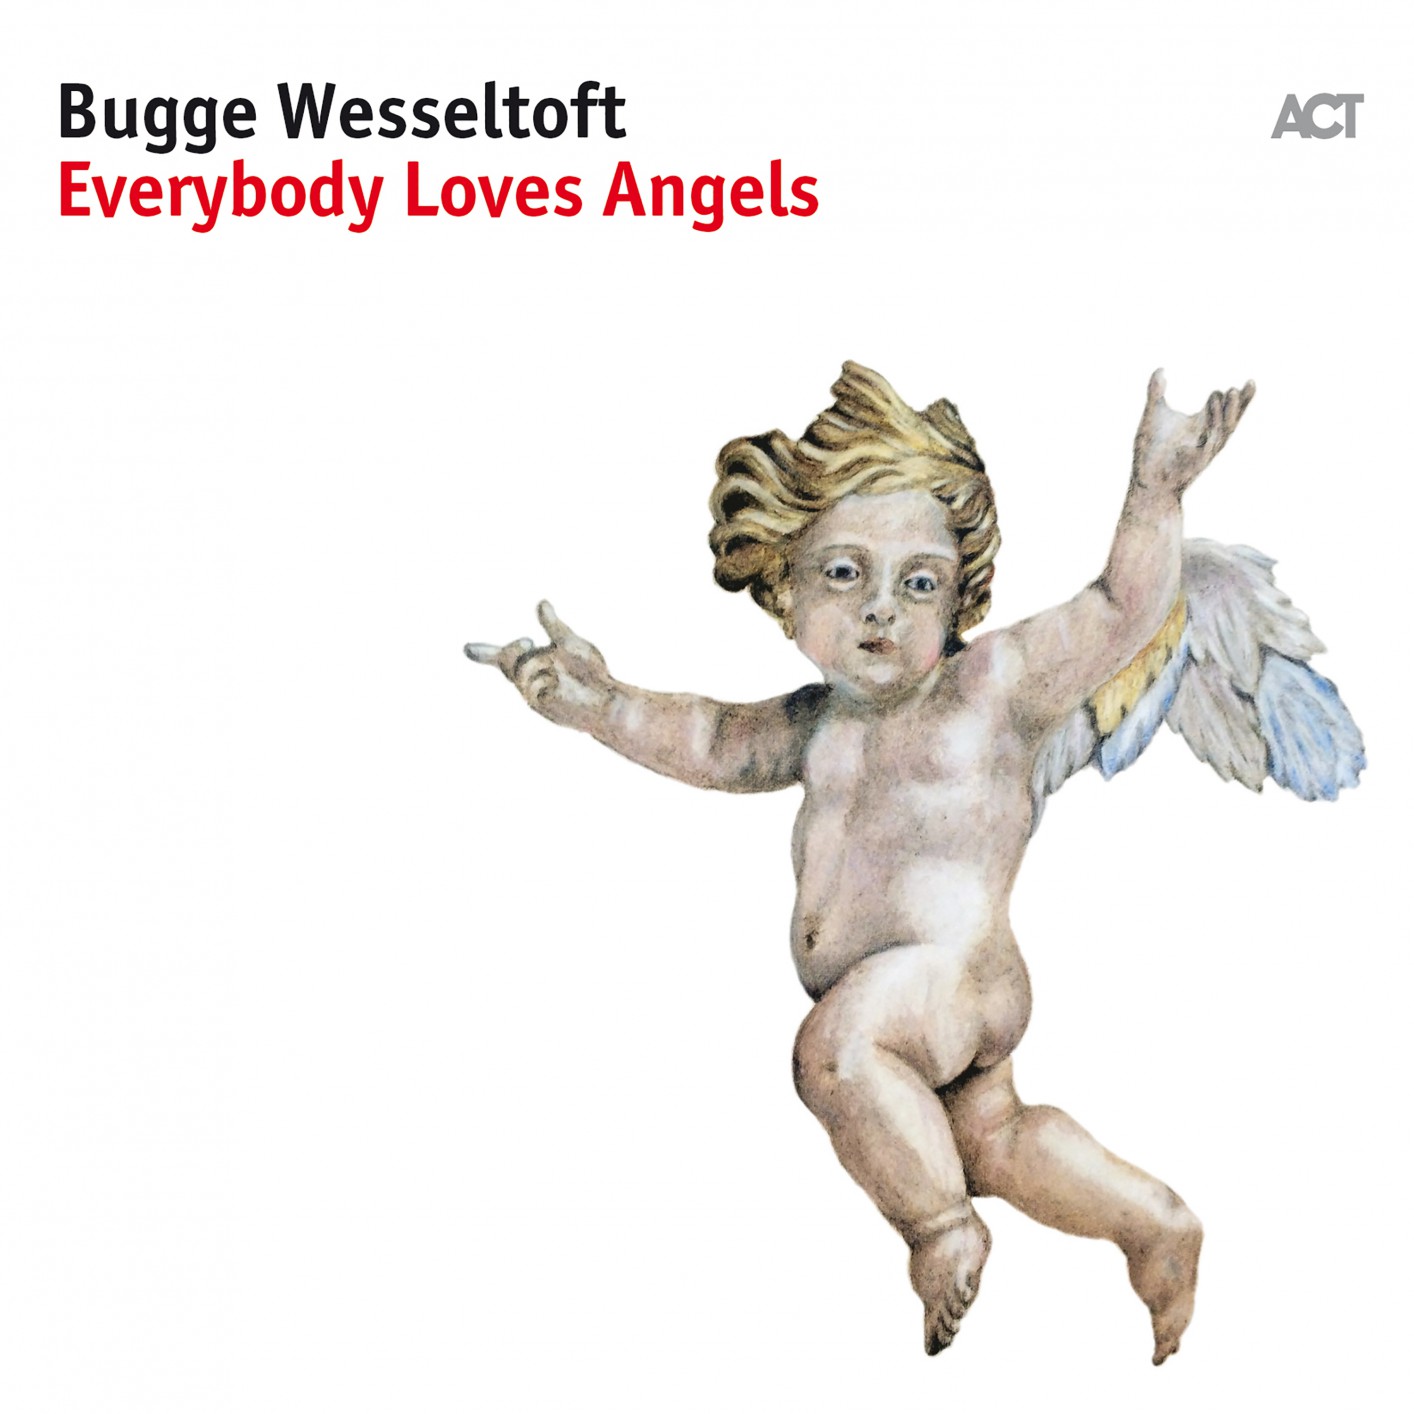 Bugge Wesseltoft - Everybody Loves Angels (2017) [FLAC 24bit/96kHz]